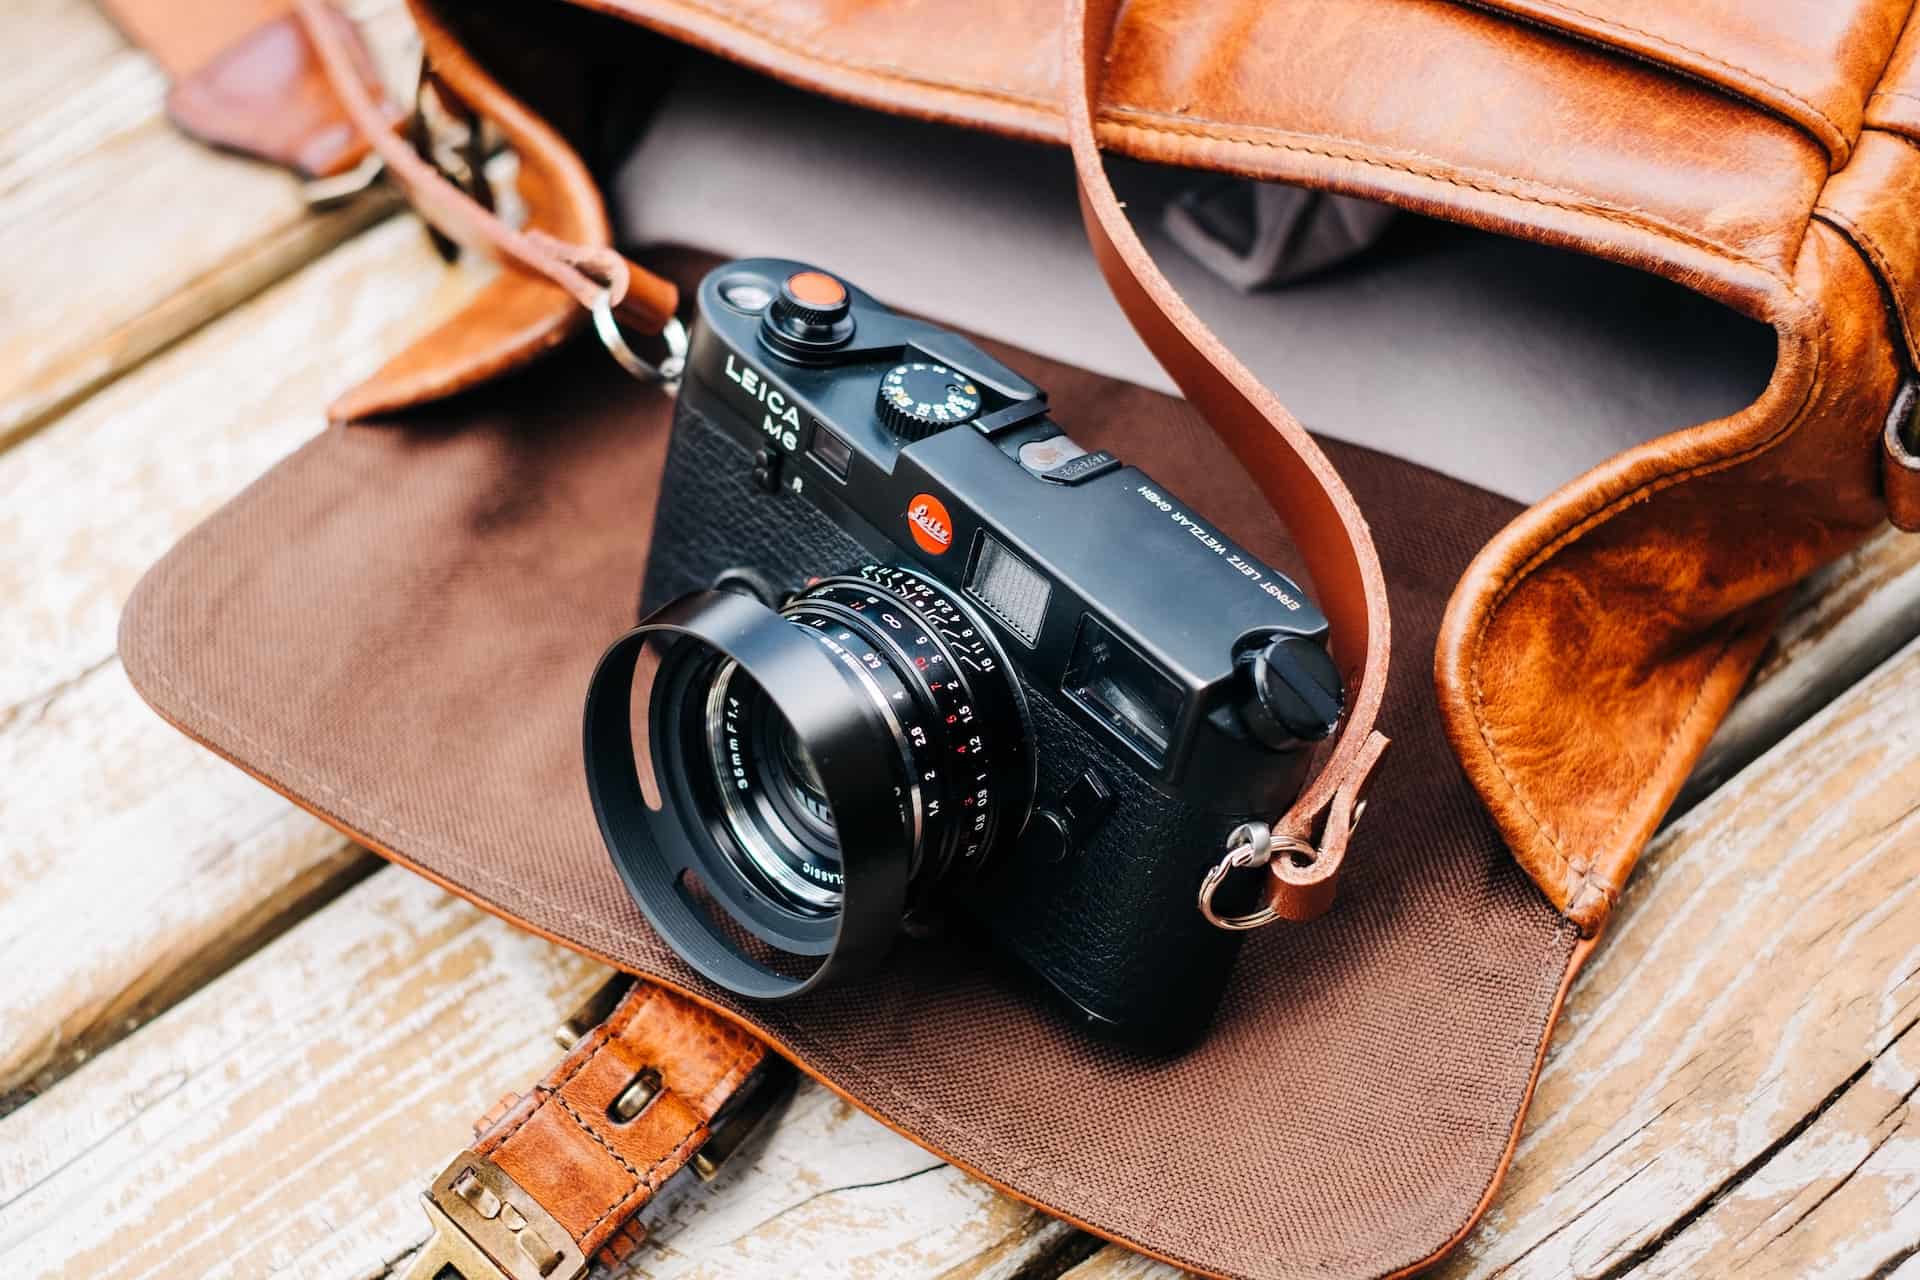 Not too big, not too small: 10 great mirrorless camera bags